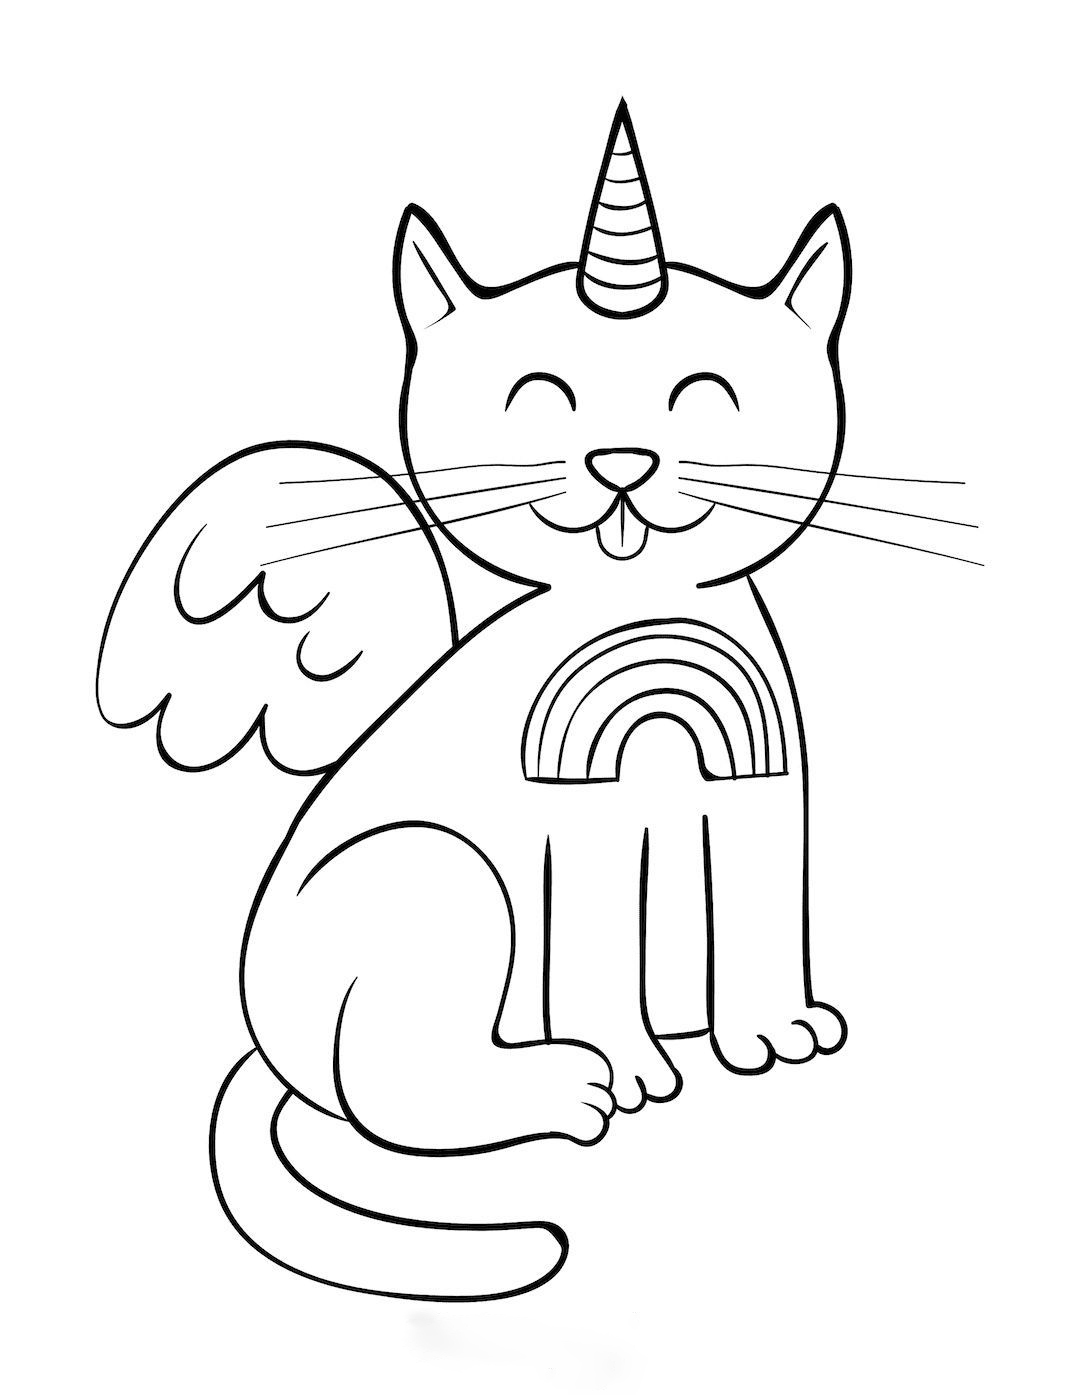 Unicorn Cat with wings Coloring Pages